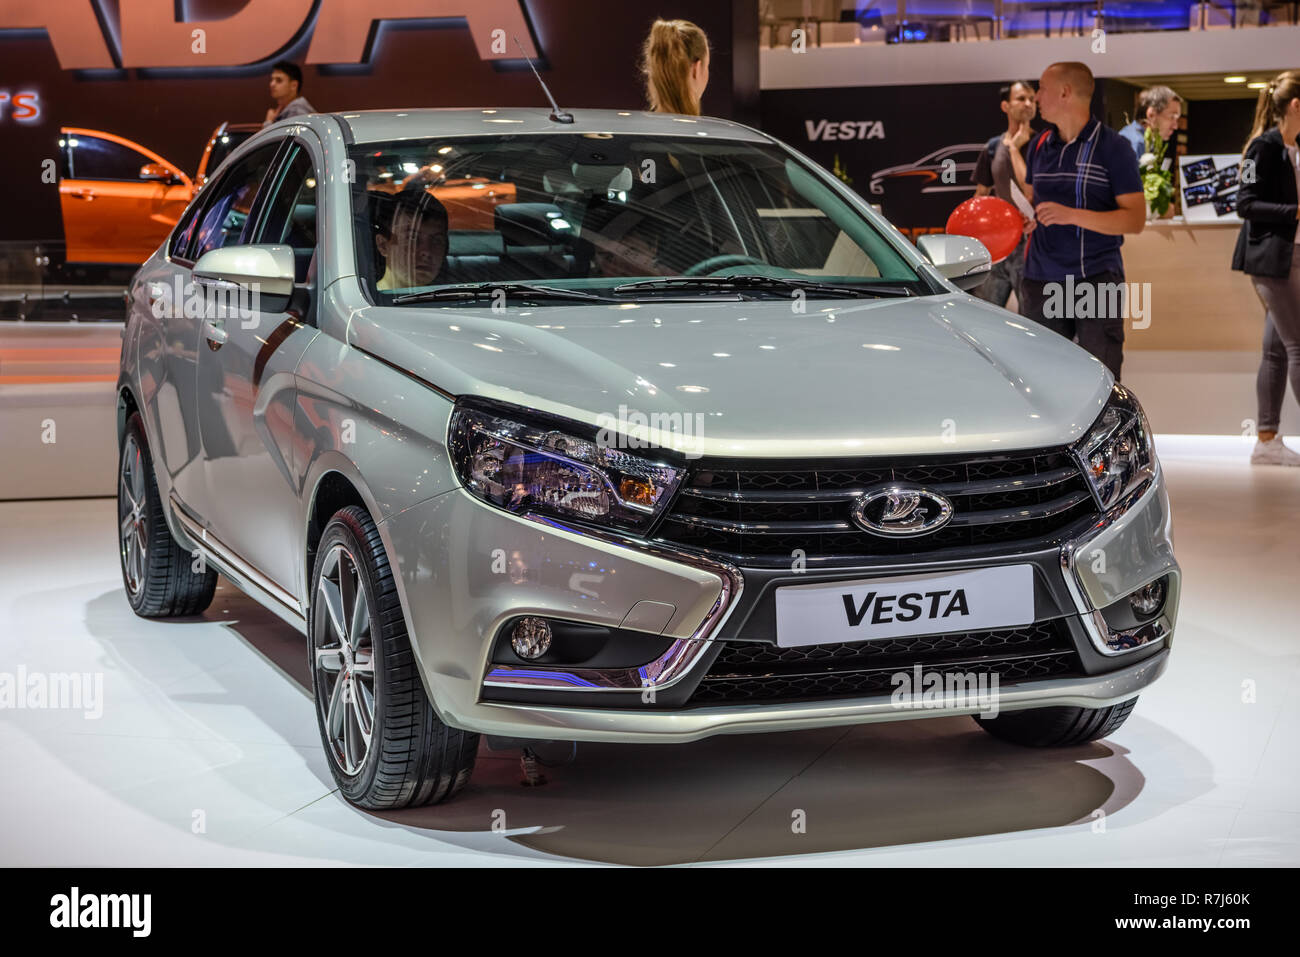 Lada Vesta High Resolution Stock Photography and Images - Alamy